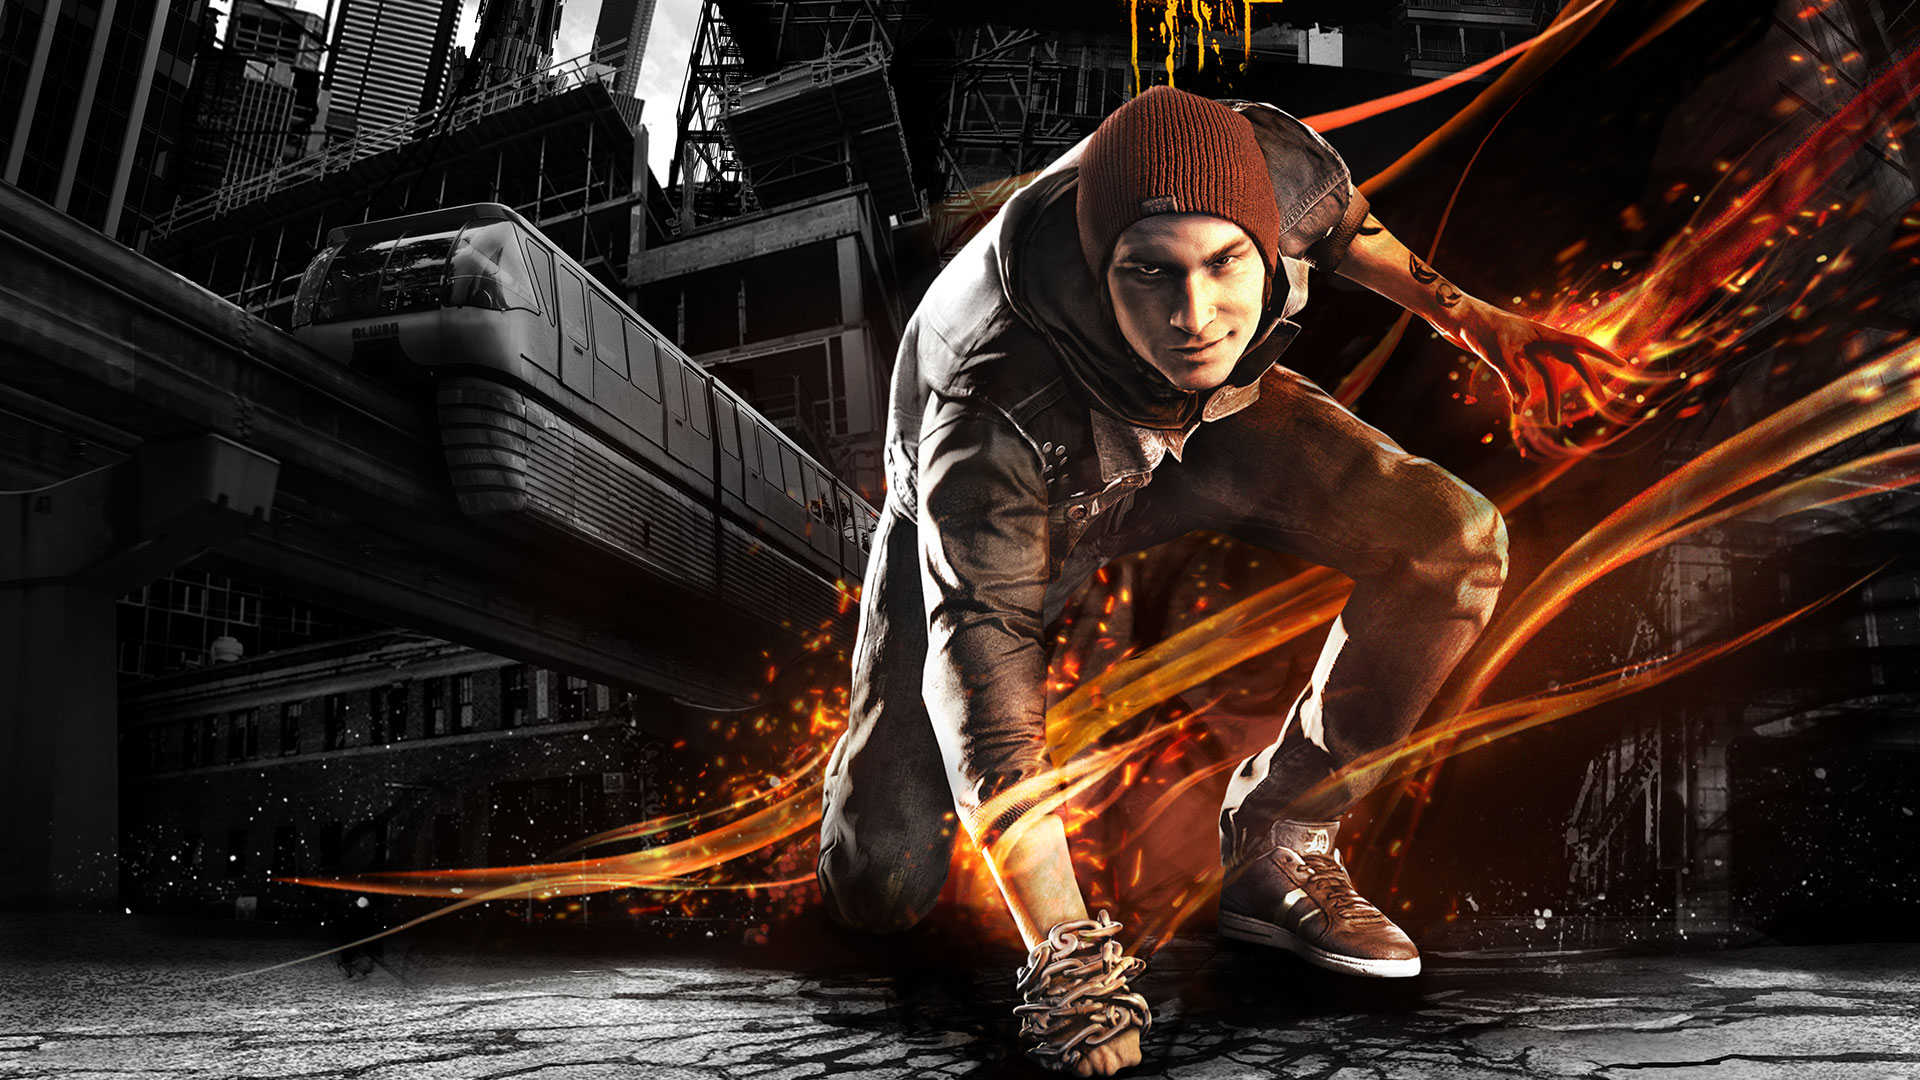 infamous second son wallpaper,action adventure game,pc game,workwear,cg artwork,action film